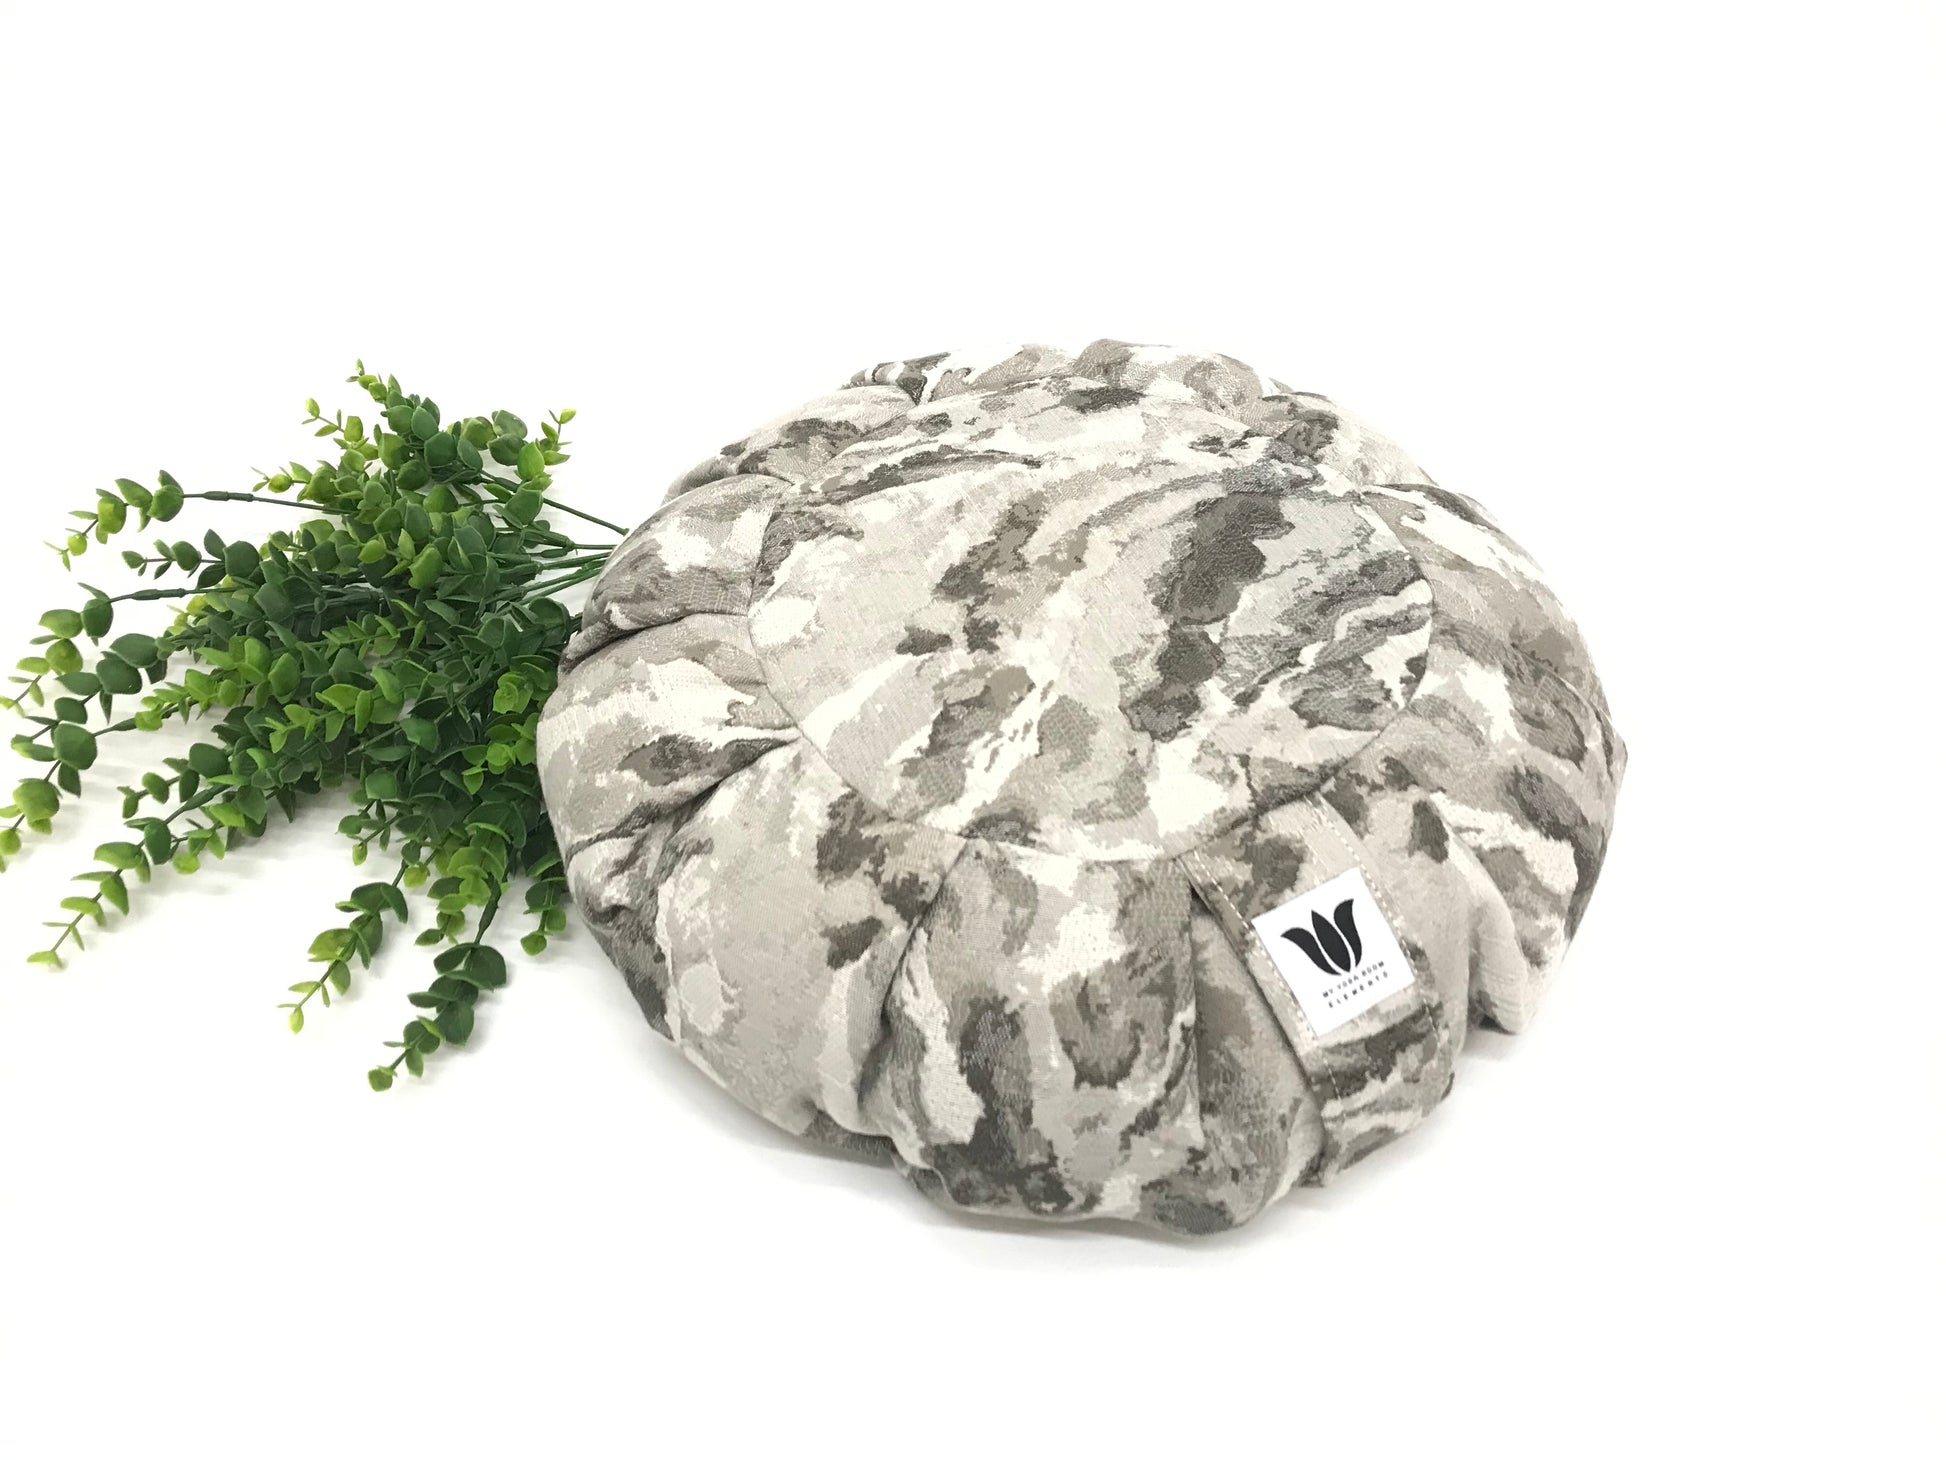 Handcrafted premium cotton home decor fabric meditation seat cushion in grey marble print fabric. Align the spine and body in comfort to calm the monkey mind in your meditation practice. Handcrafted in Calgary, Alberta Canada